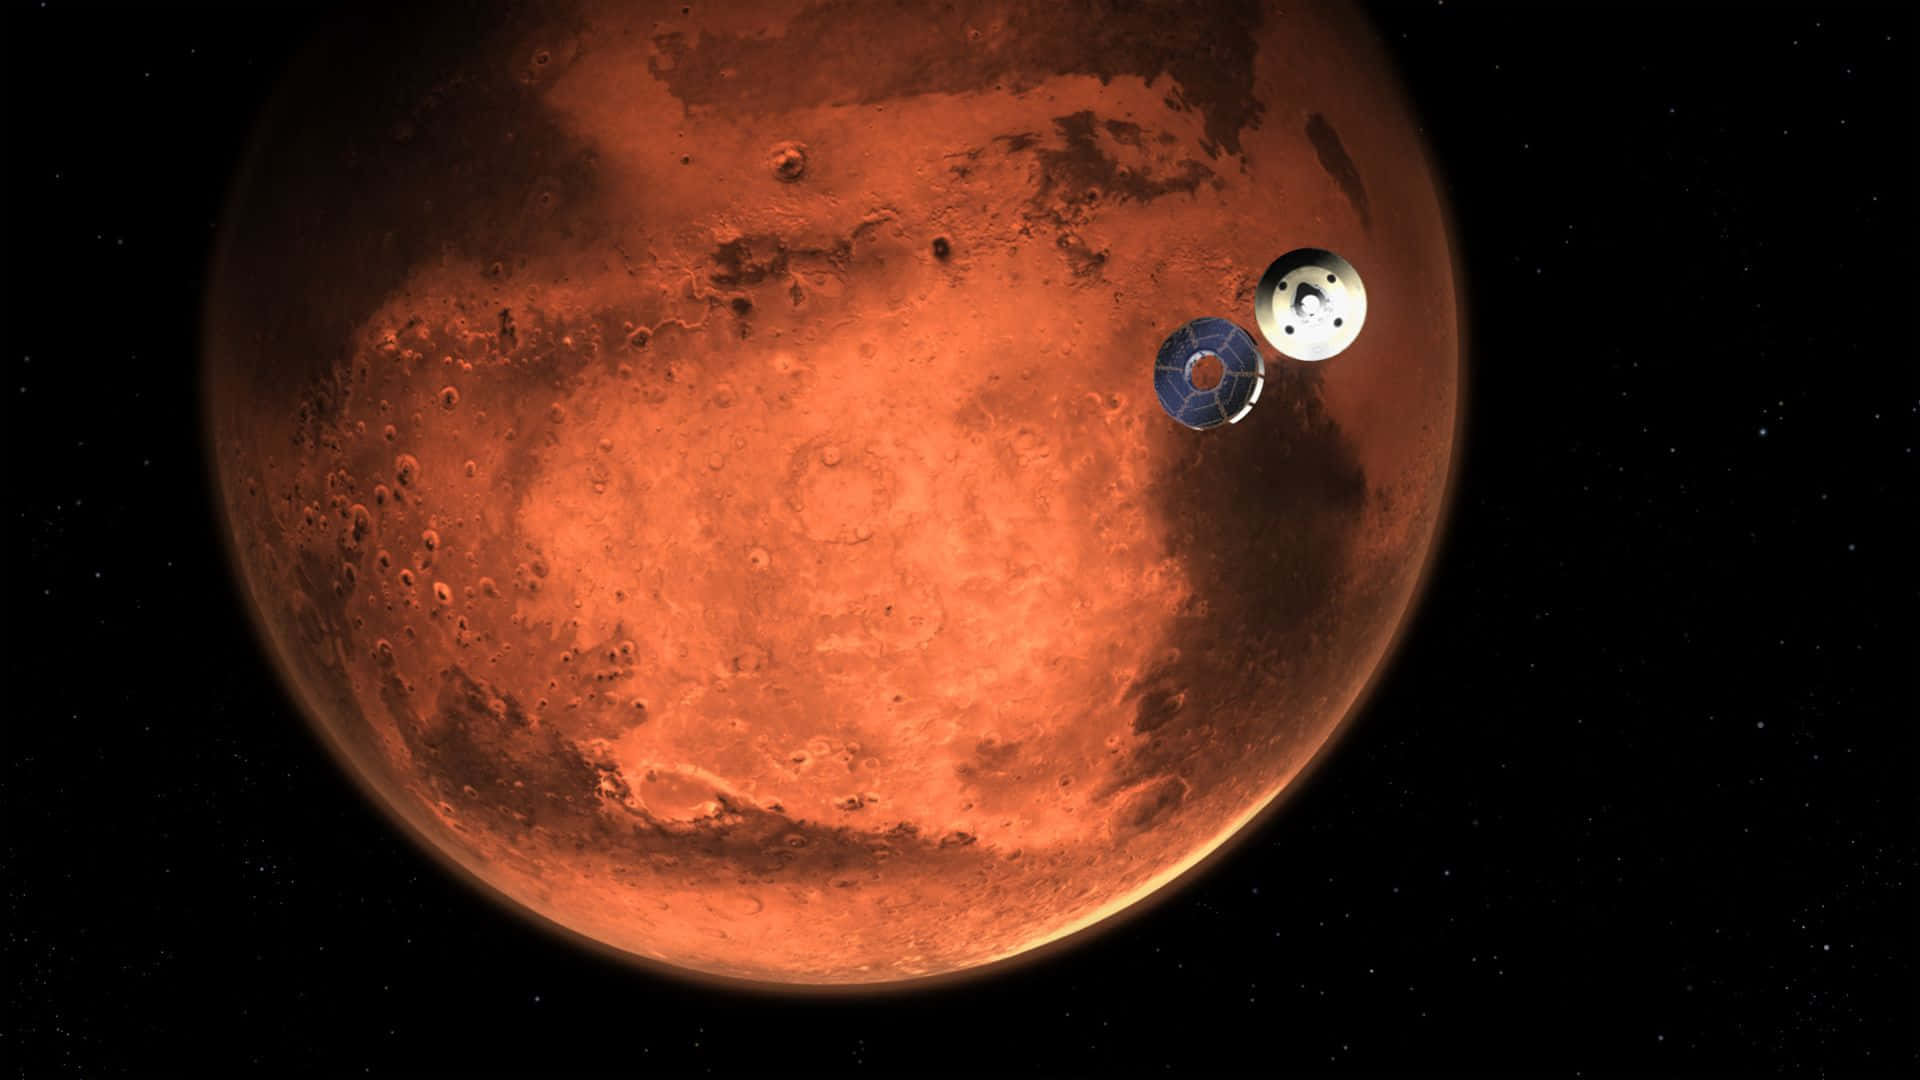 View of the Red Planet, Mars